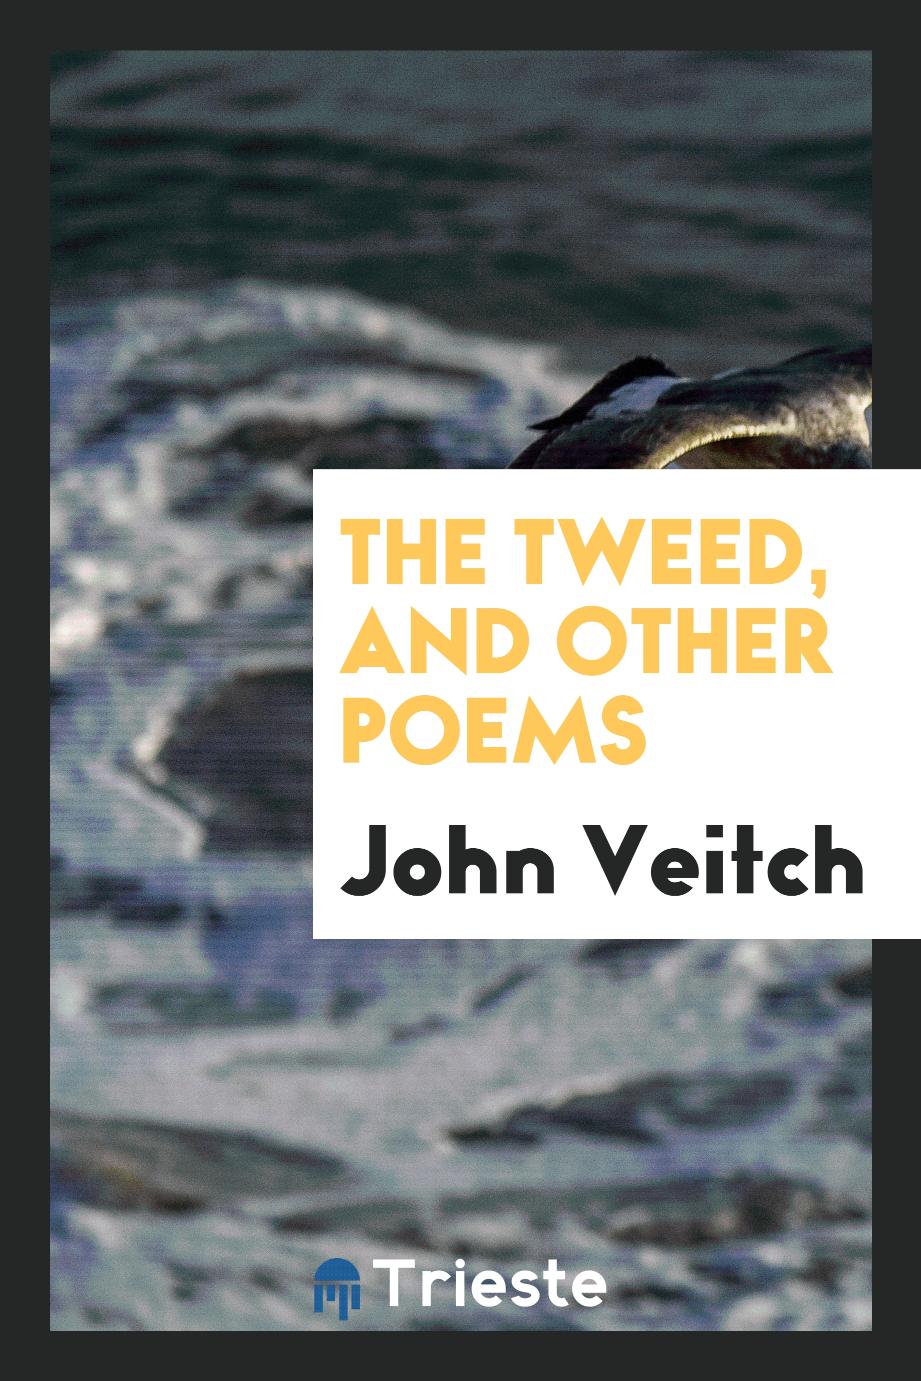 The Tweed, and other poems